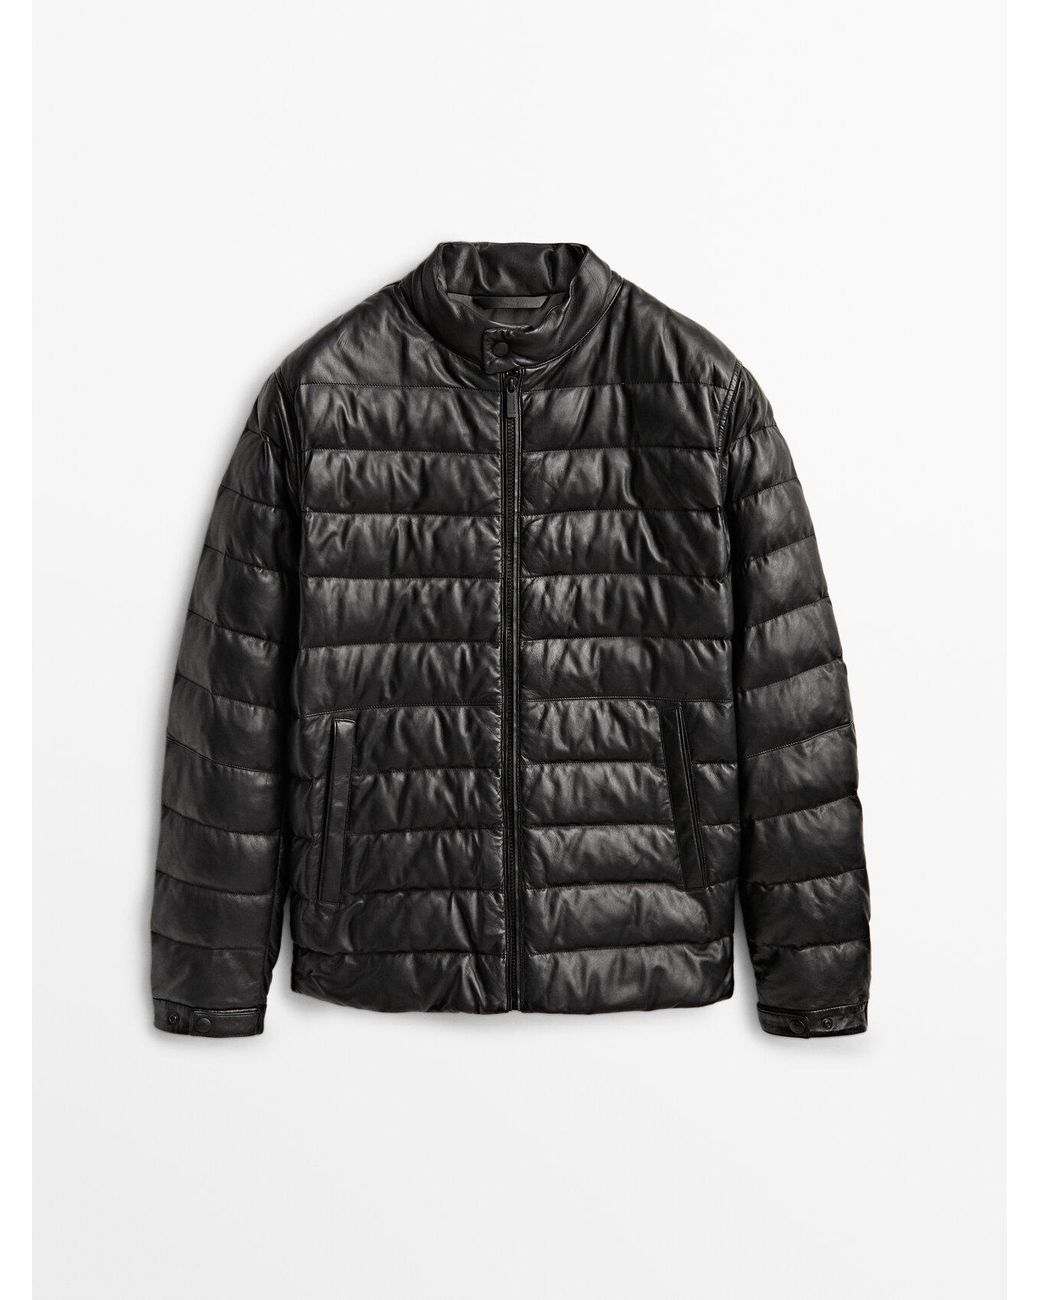 MASSIMO DUTTI Black Quilted Nappa Leather Jacket for Men | Lyst